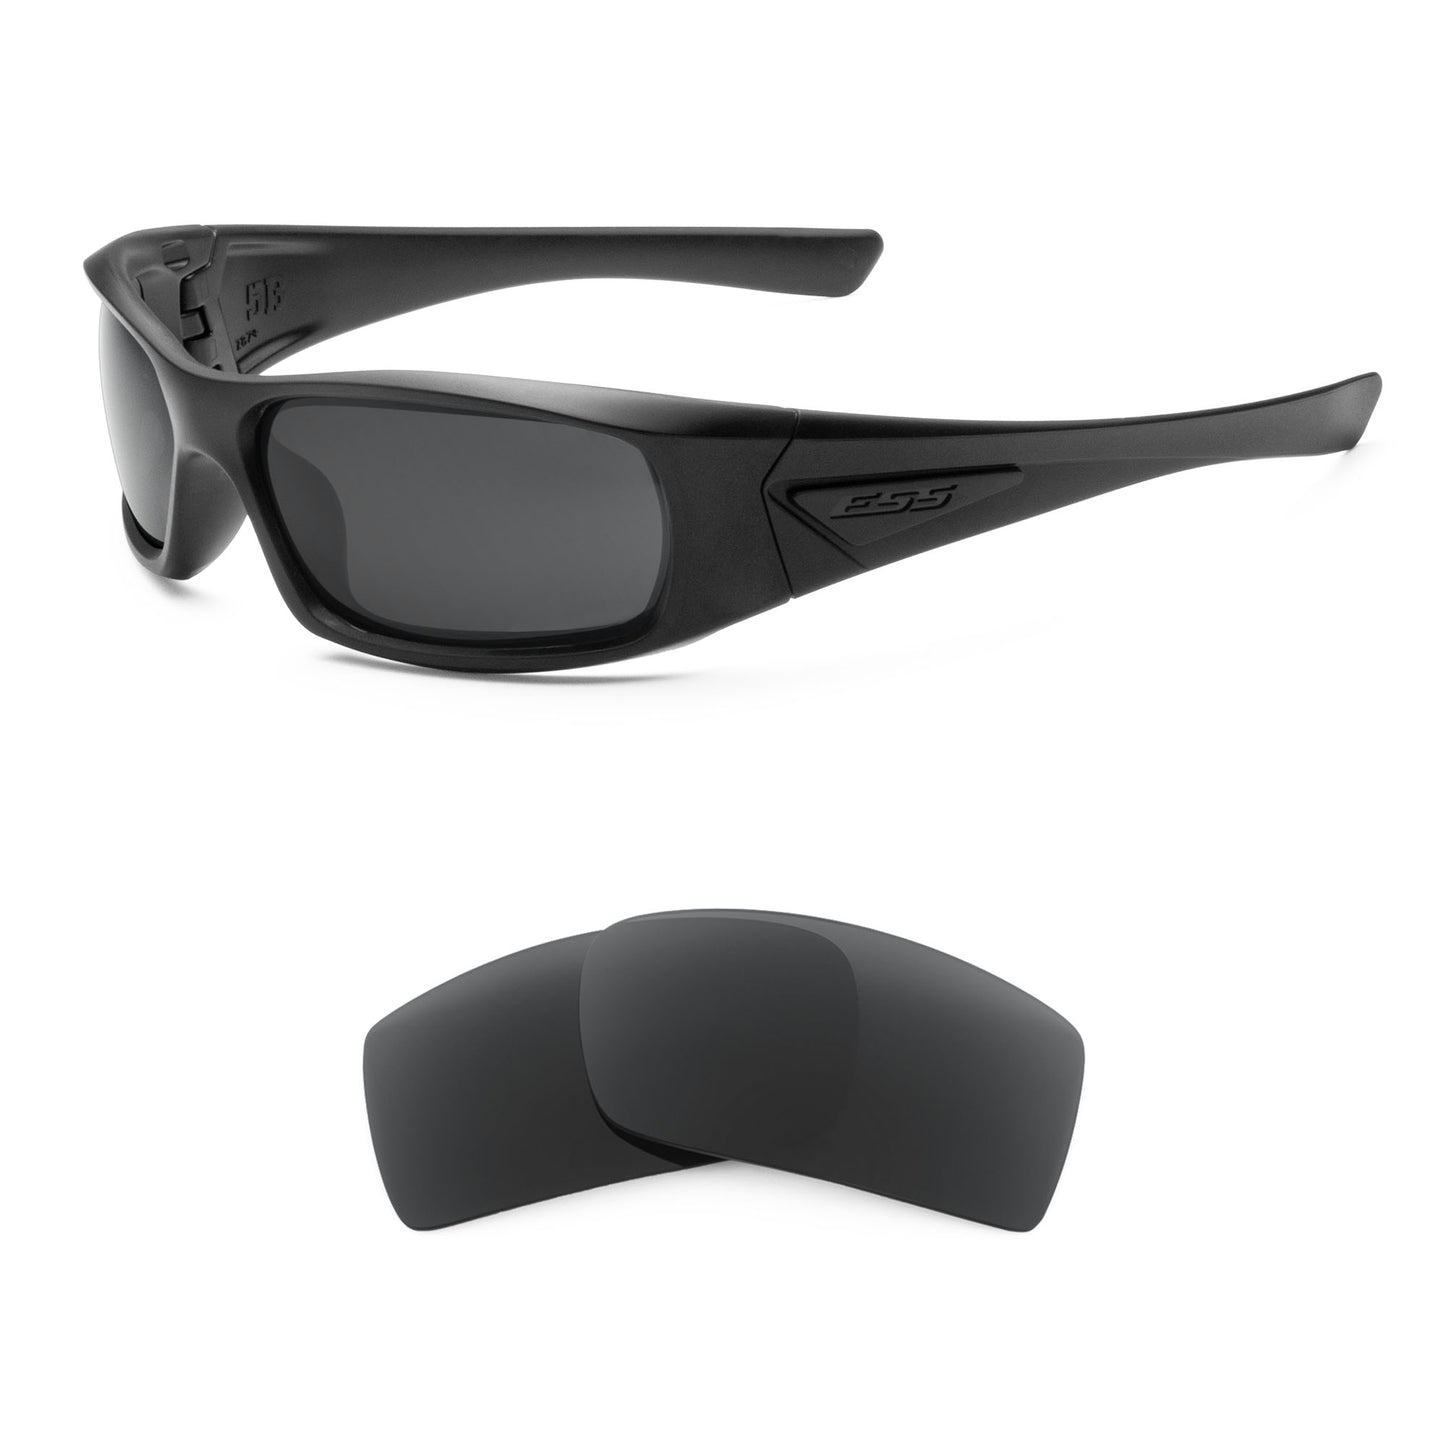 Ess 5b sunglasses with replacement lenses